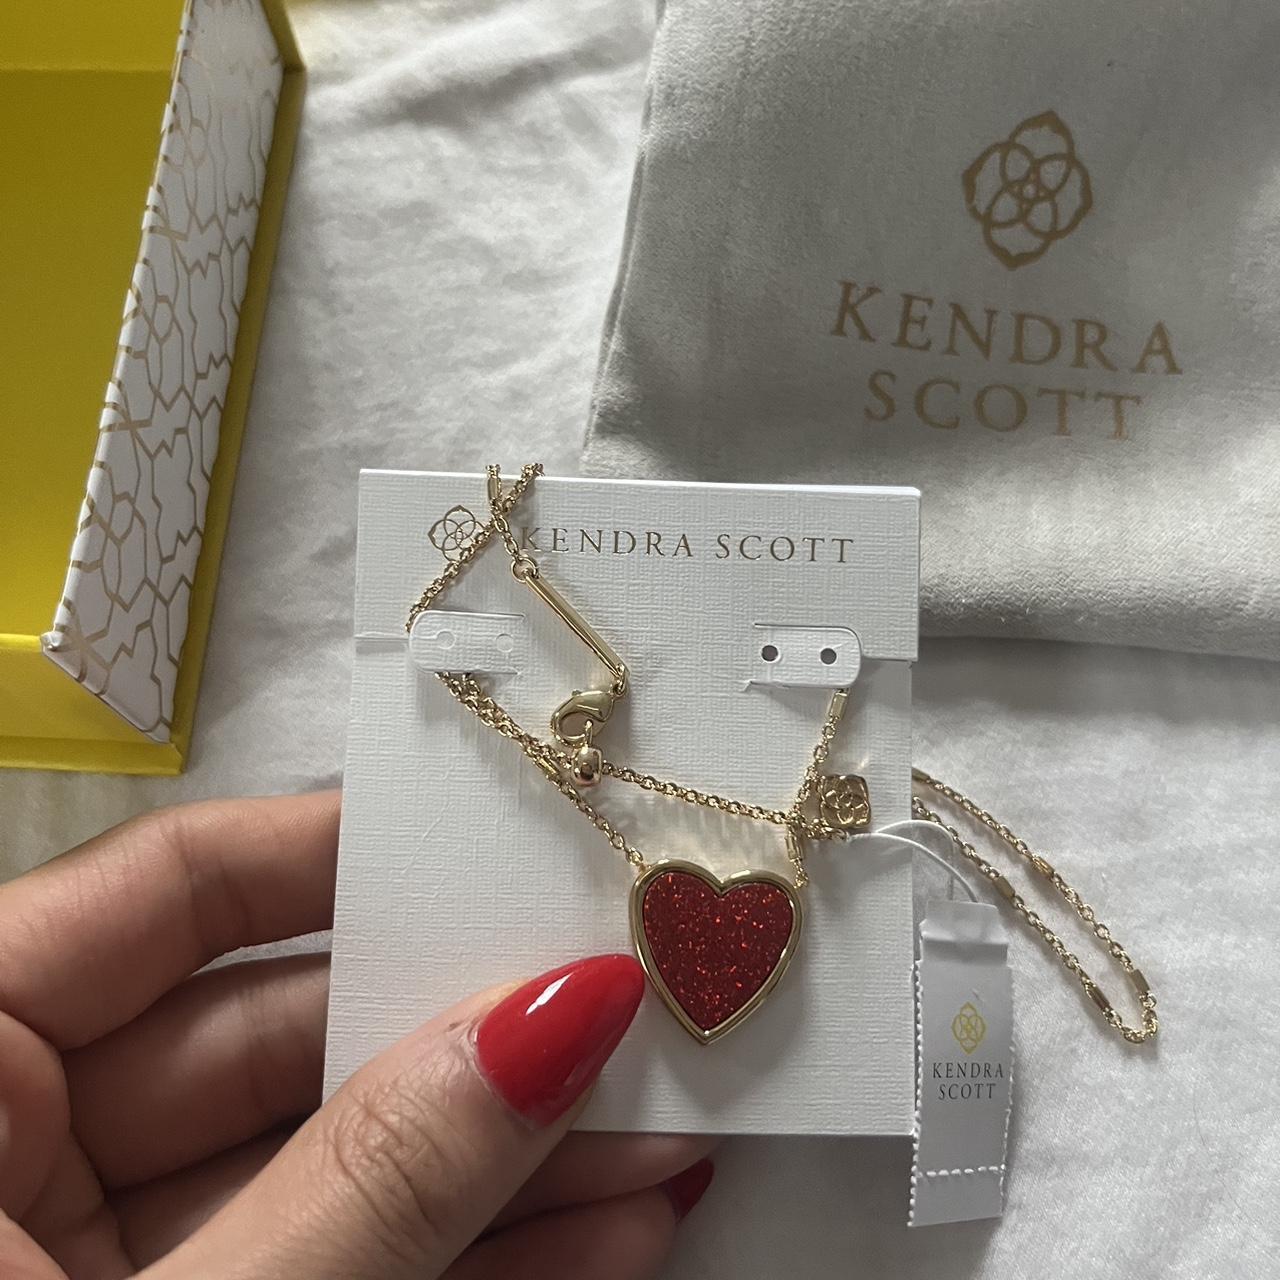 Kendra Scott Vanessa Large Long Pendant Necklace in Cherry Red Illusion,  Gold-Plated | REEDS Jewelers